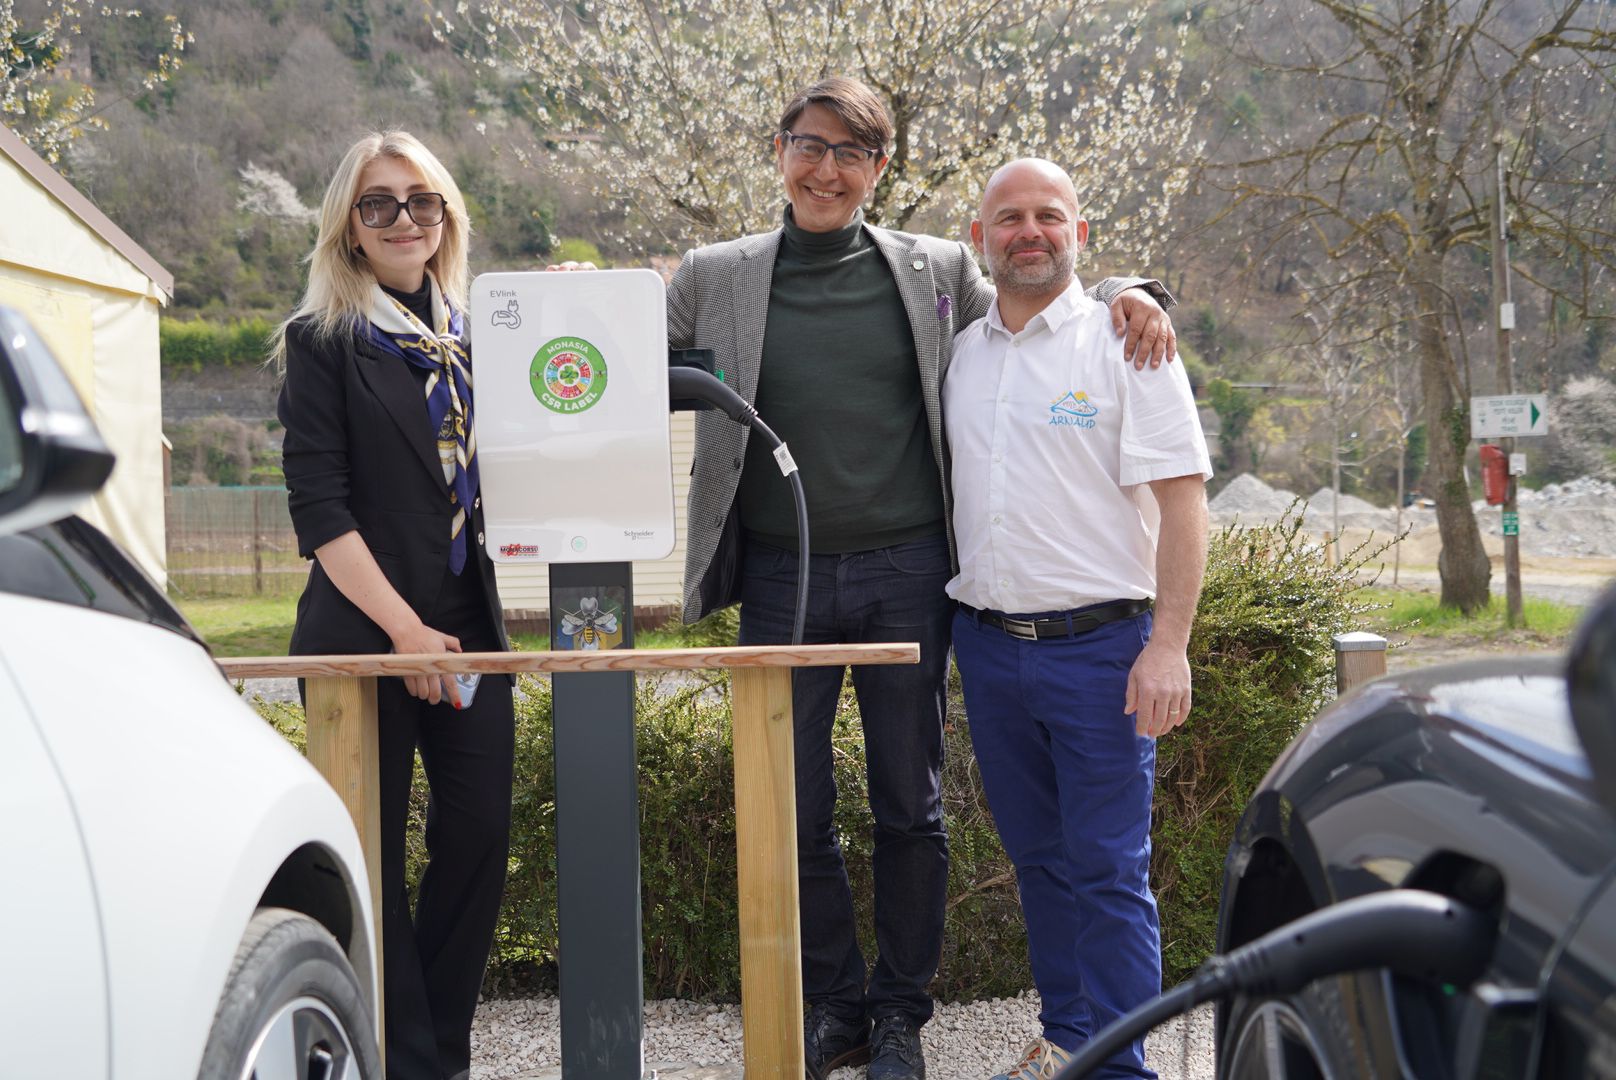 Power to the plug-ins celebrated at the Camping Les Templiers made possible by Lepton Charity Foundation with a media support of MonAsia Association